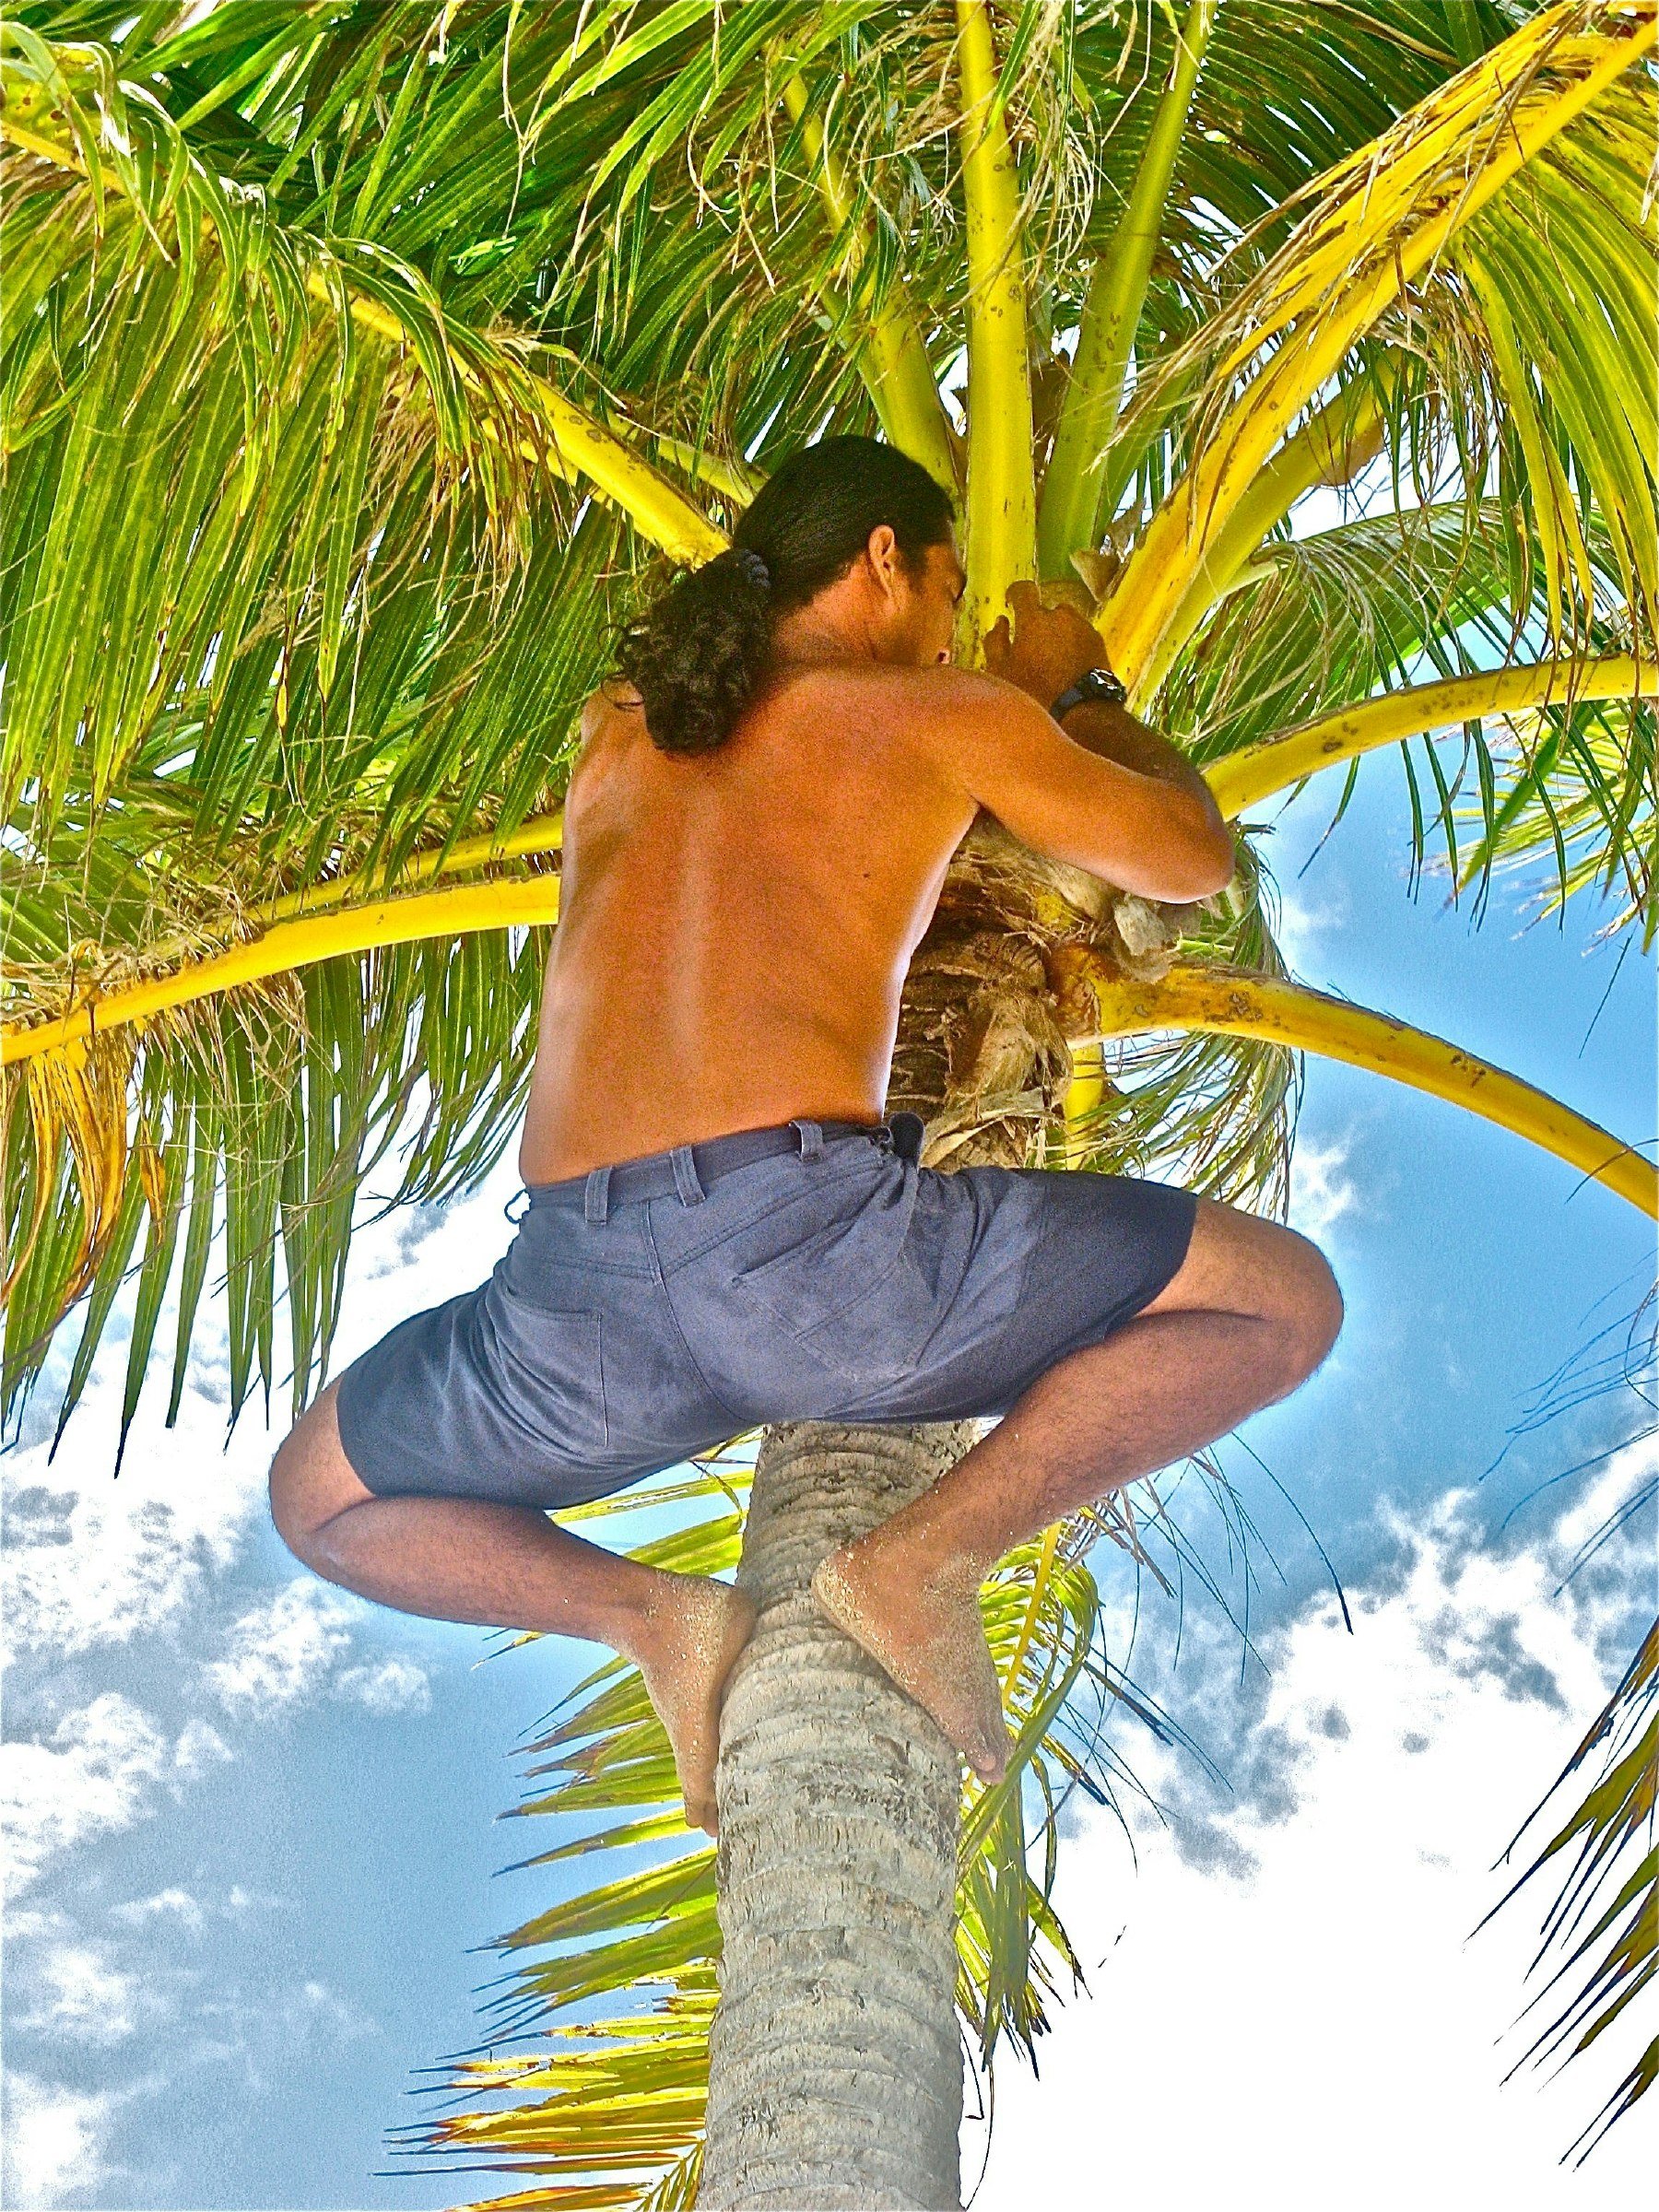 A Tahitian man climbs a palm tree to collect coconuts